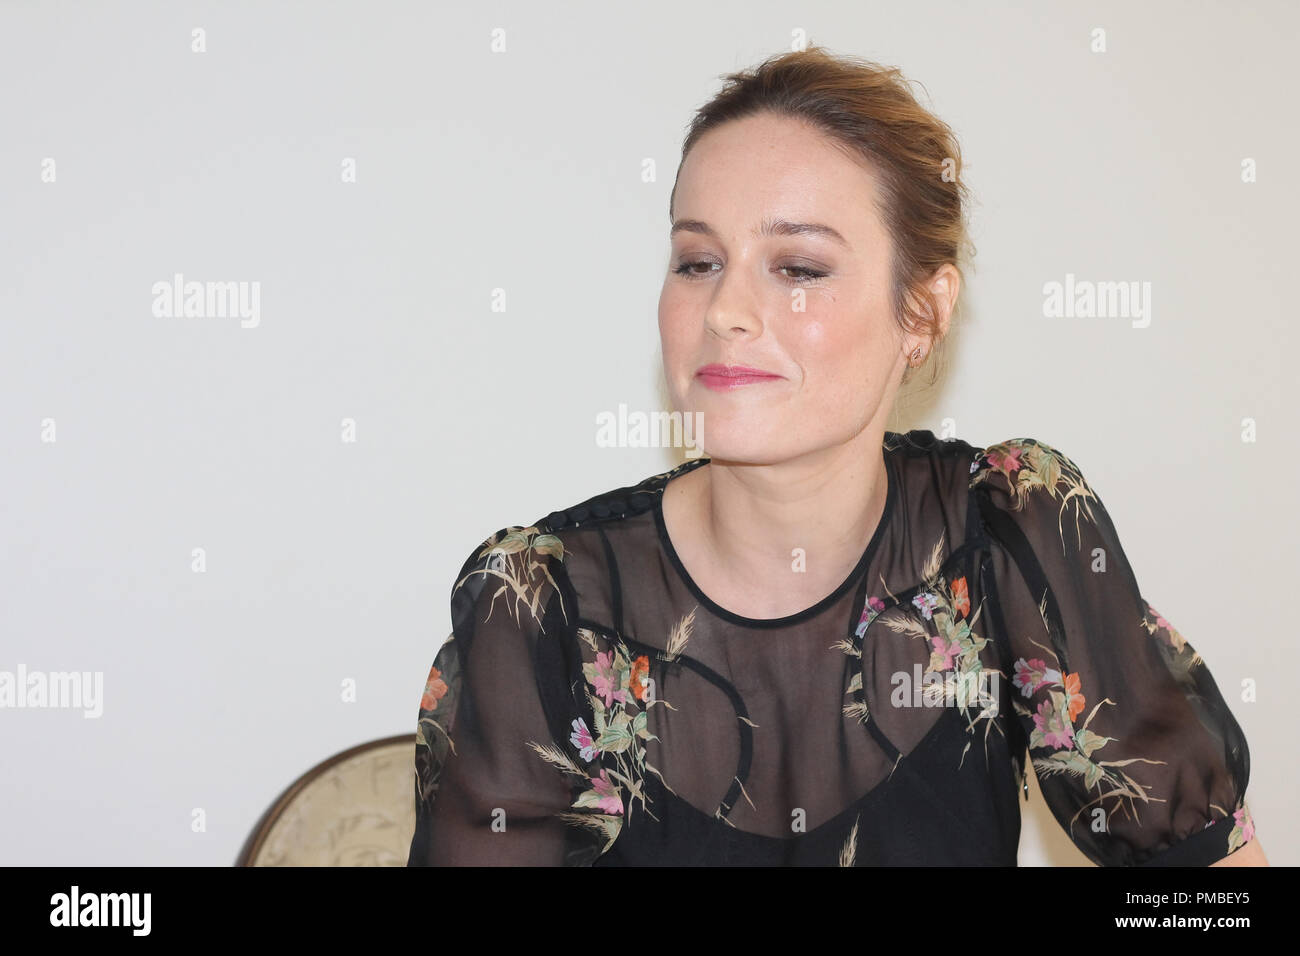 Brie Larson at 'The Glass Castle' Press Conference held on July 24, 2017 at the Four Seasons Hotel in Beverly Hills,  California. No Tabloids. No USA sales for 30 days of origination.  File Reference # 33379 002JRC  For Editorial Use Only -  All Rights Reserved Stock Photo